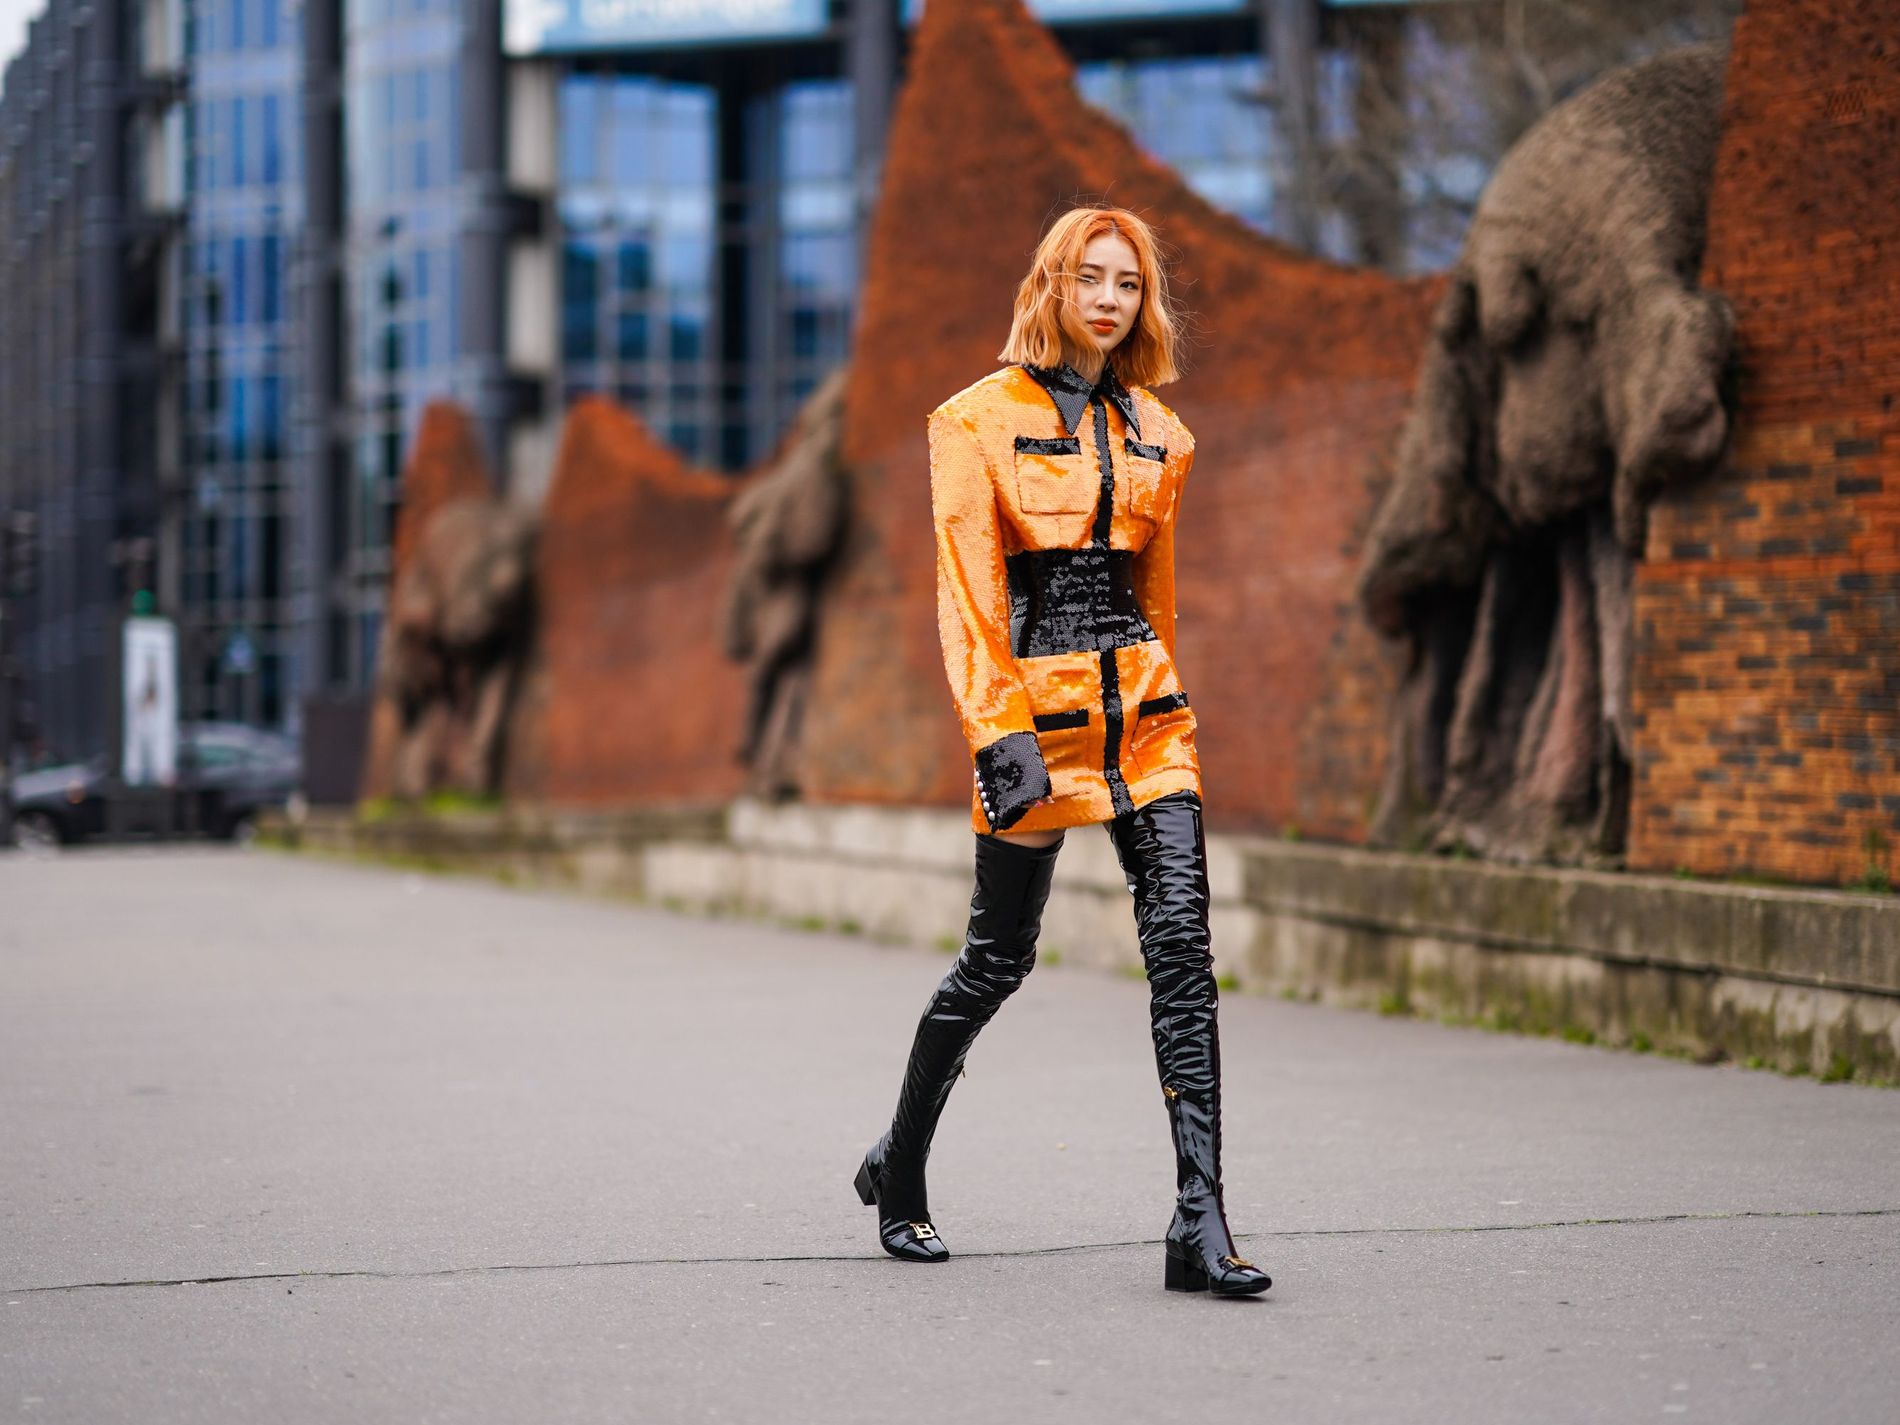 Street style: Irene Kim wears thigh high puddle boots